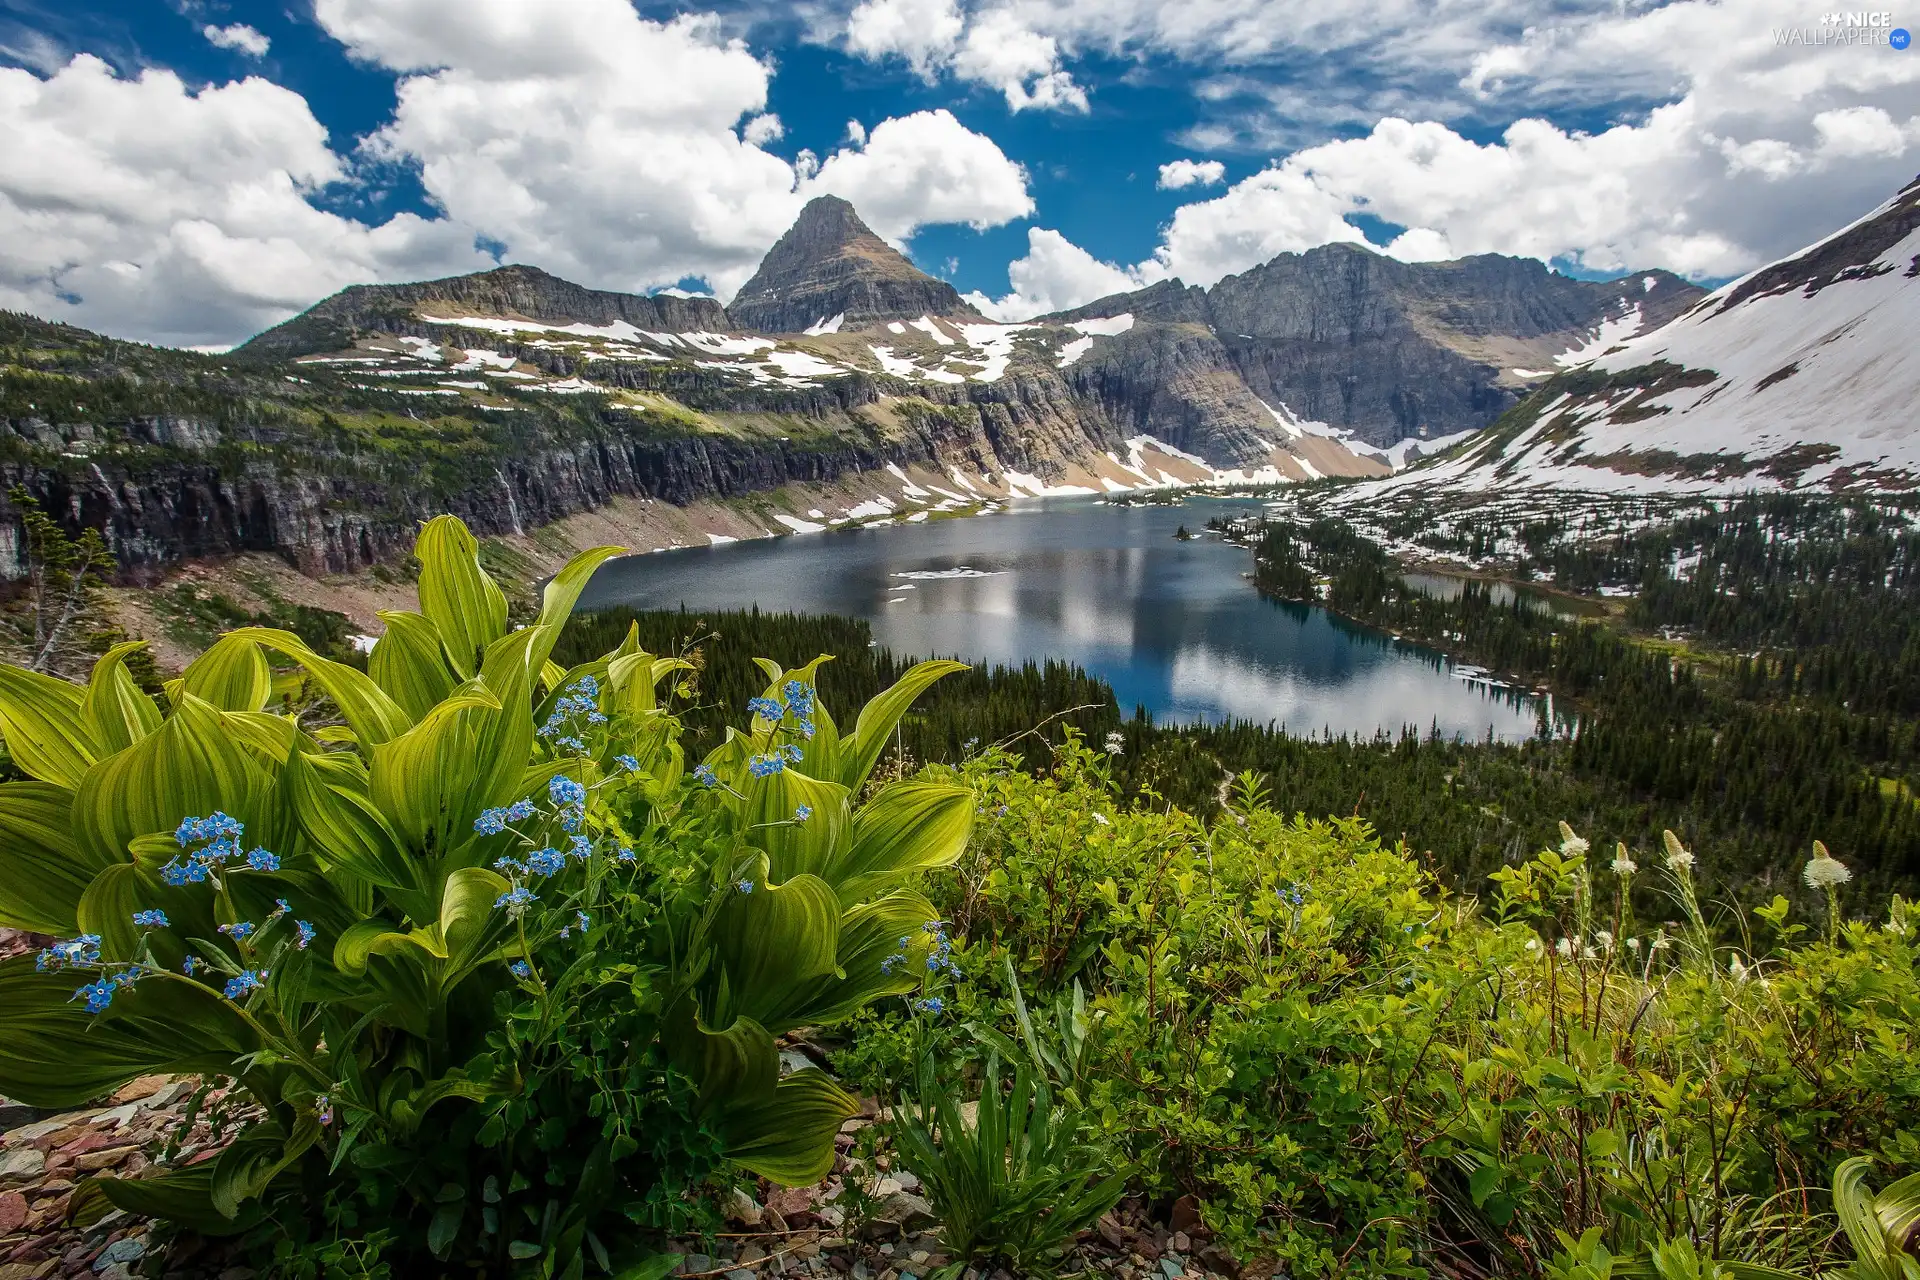 trees, viewes, The United States, clouds, Montana State, Hidden Lake, Mountains, Glacier National Park